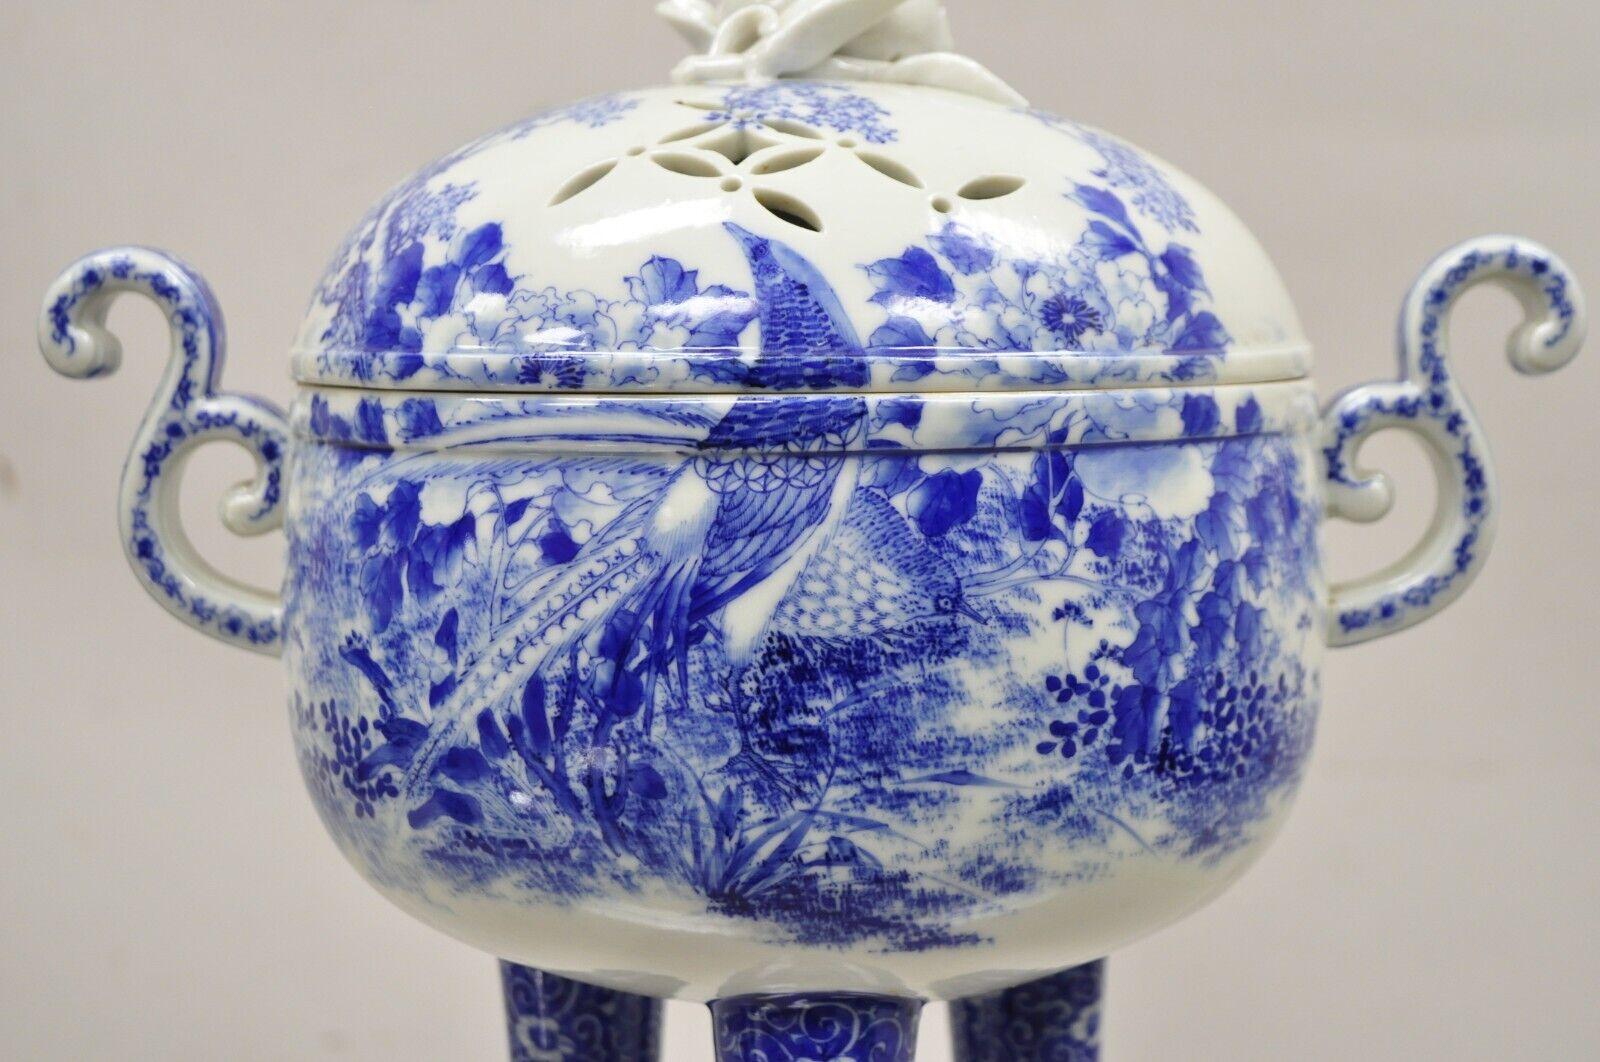 Antique 19th C Blue and White Chinese Porcelain Footed Incense Burner. Item features blue and white scenes with birds and trees, scrolling handles, footed tripod base, pierced lid, very nice antique. Circa 19th Century. Measurements: 13